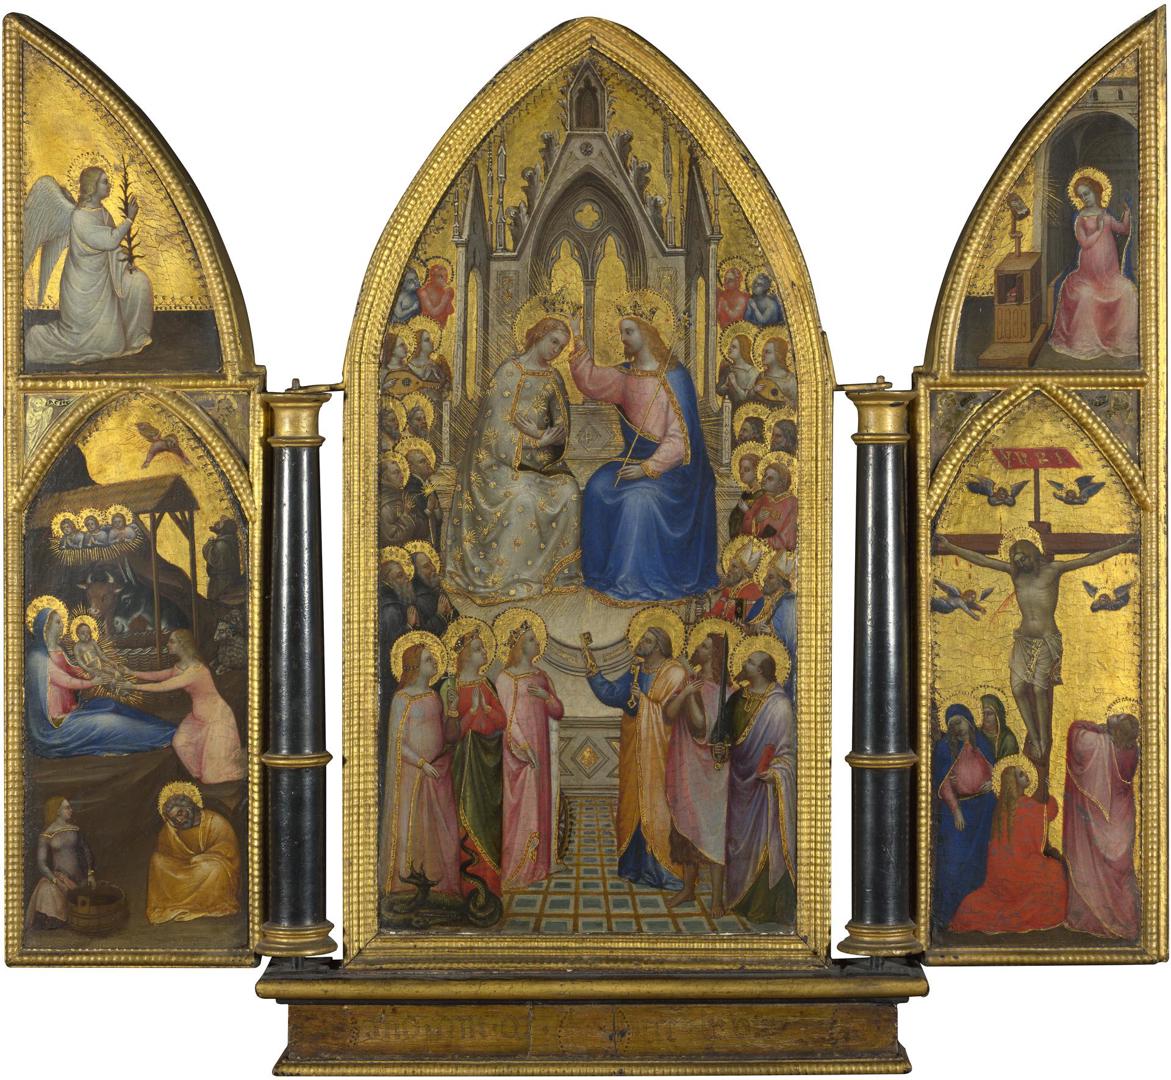 The Coronation of the Virgin, and Other Scenes by Giusto de' Menabuoi